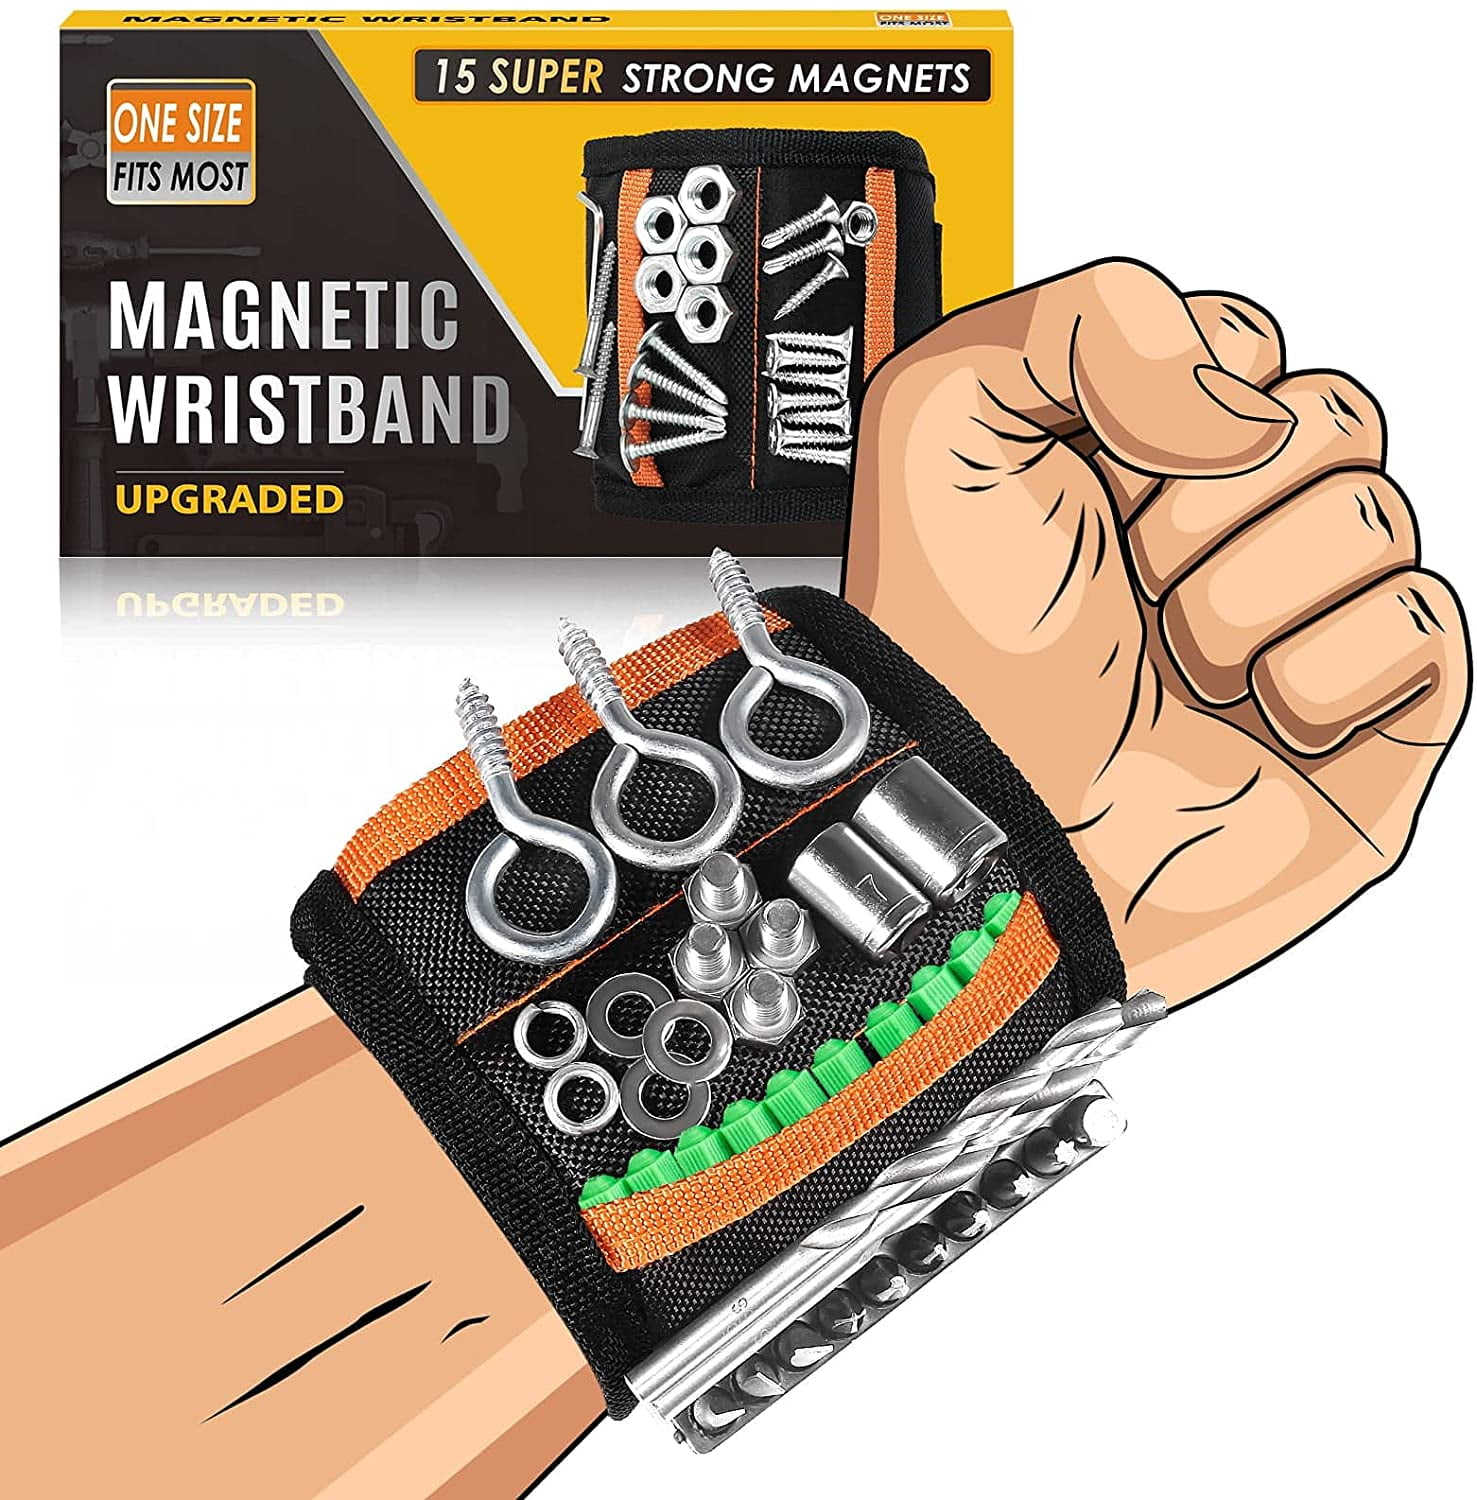 Magnetic Wristband, Blendx Men Gifts Tool with Strong Magnets for Holding Screws, Nails, Drill Bits Cool Tools for Father's Day Gift for Him, Men